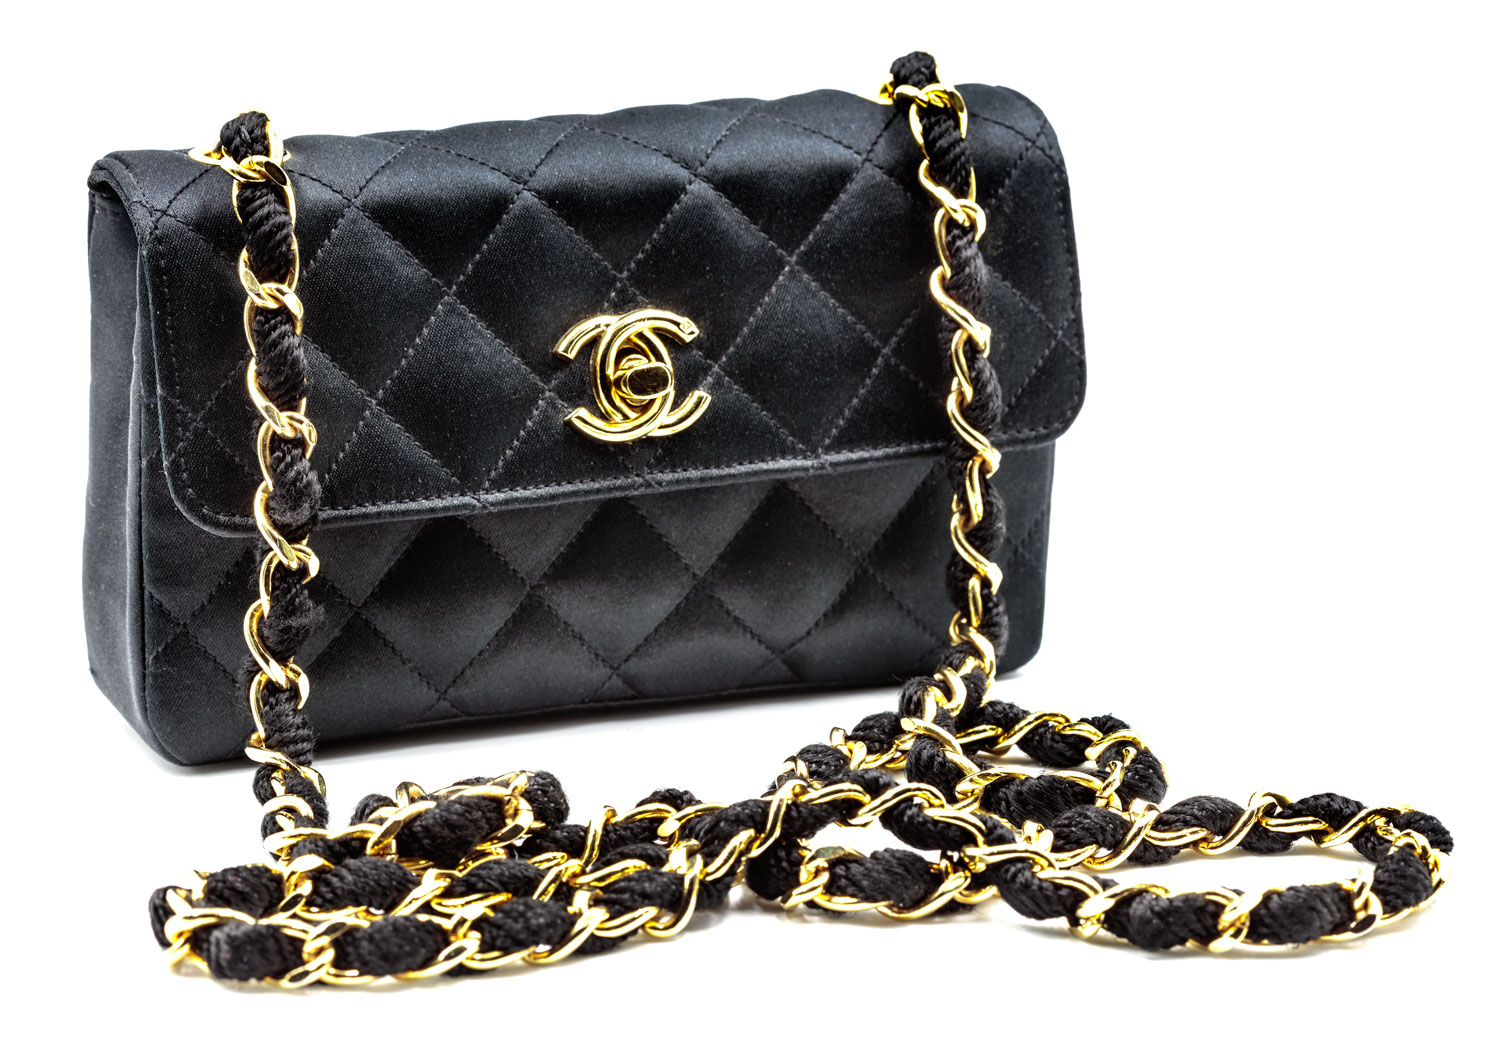 Chanel Classic Quilted WOC Crossbody Bag Pink in Leather with Goldtone  US